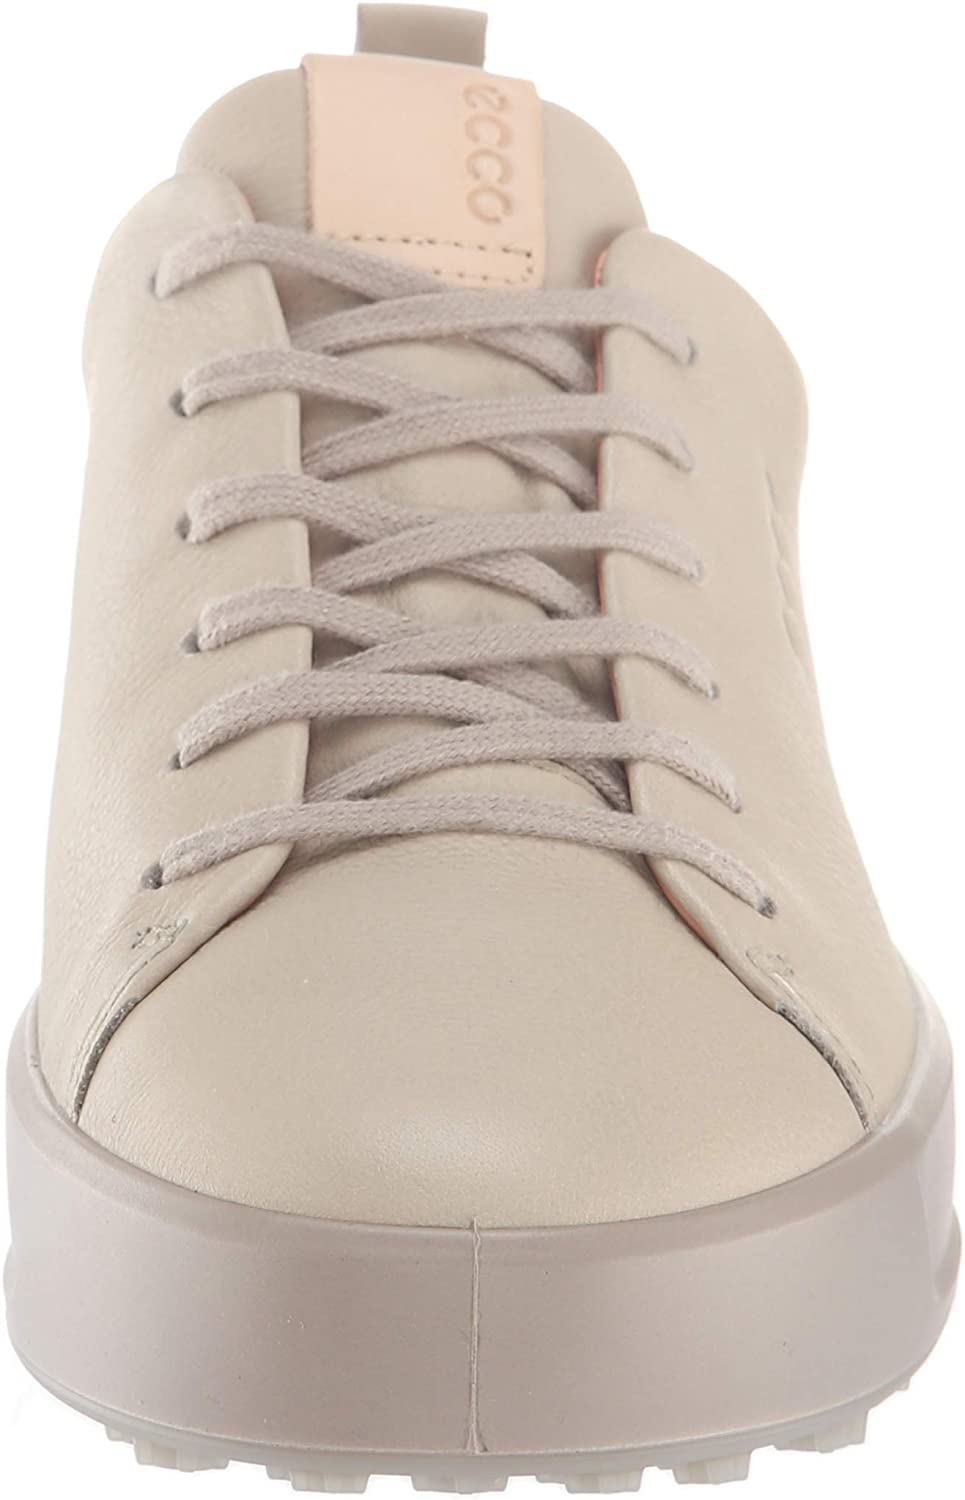 ECCO Women's Casual Hybrid Golf Shoes - image 2 of 8